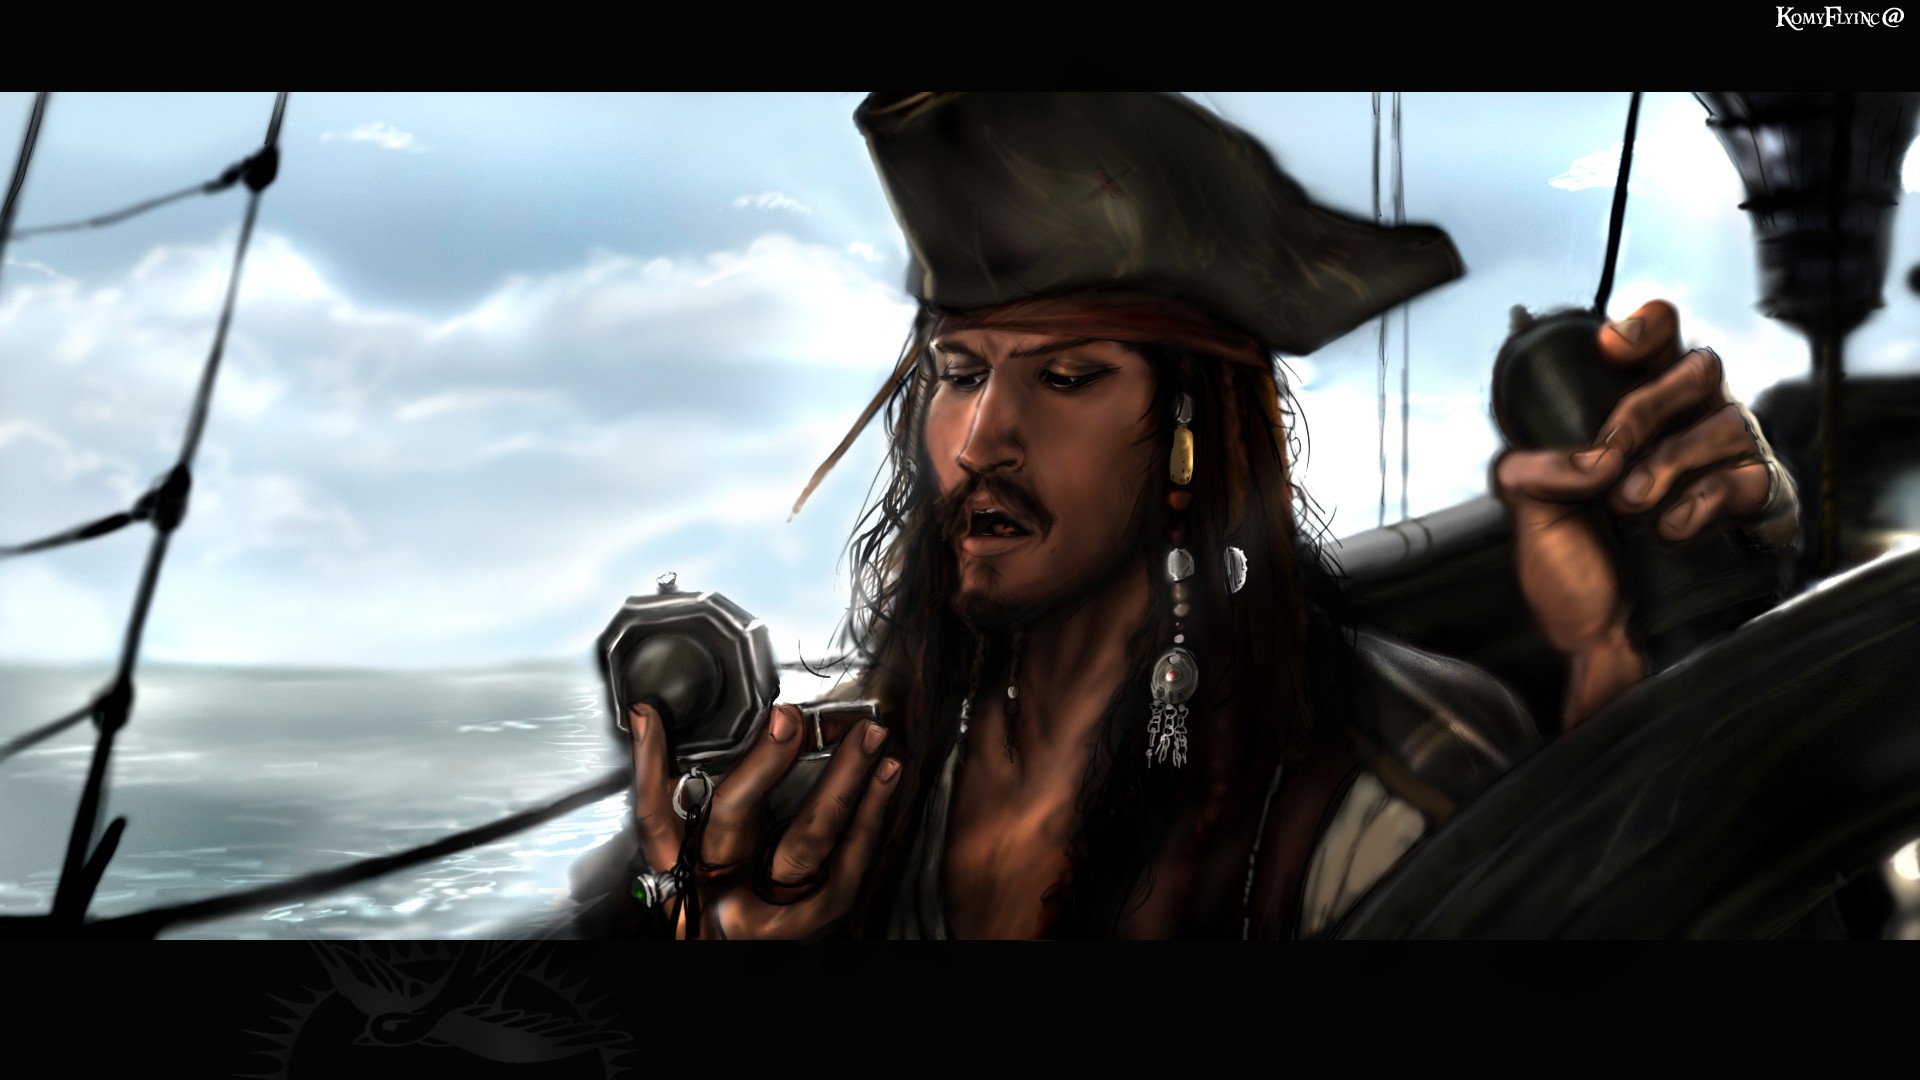 Download wallpaper for 1920x1080 resolution | Pirates of the Caribbean Jack  Sparrow Pirate HD | art and paintings | Wallpaper Better